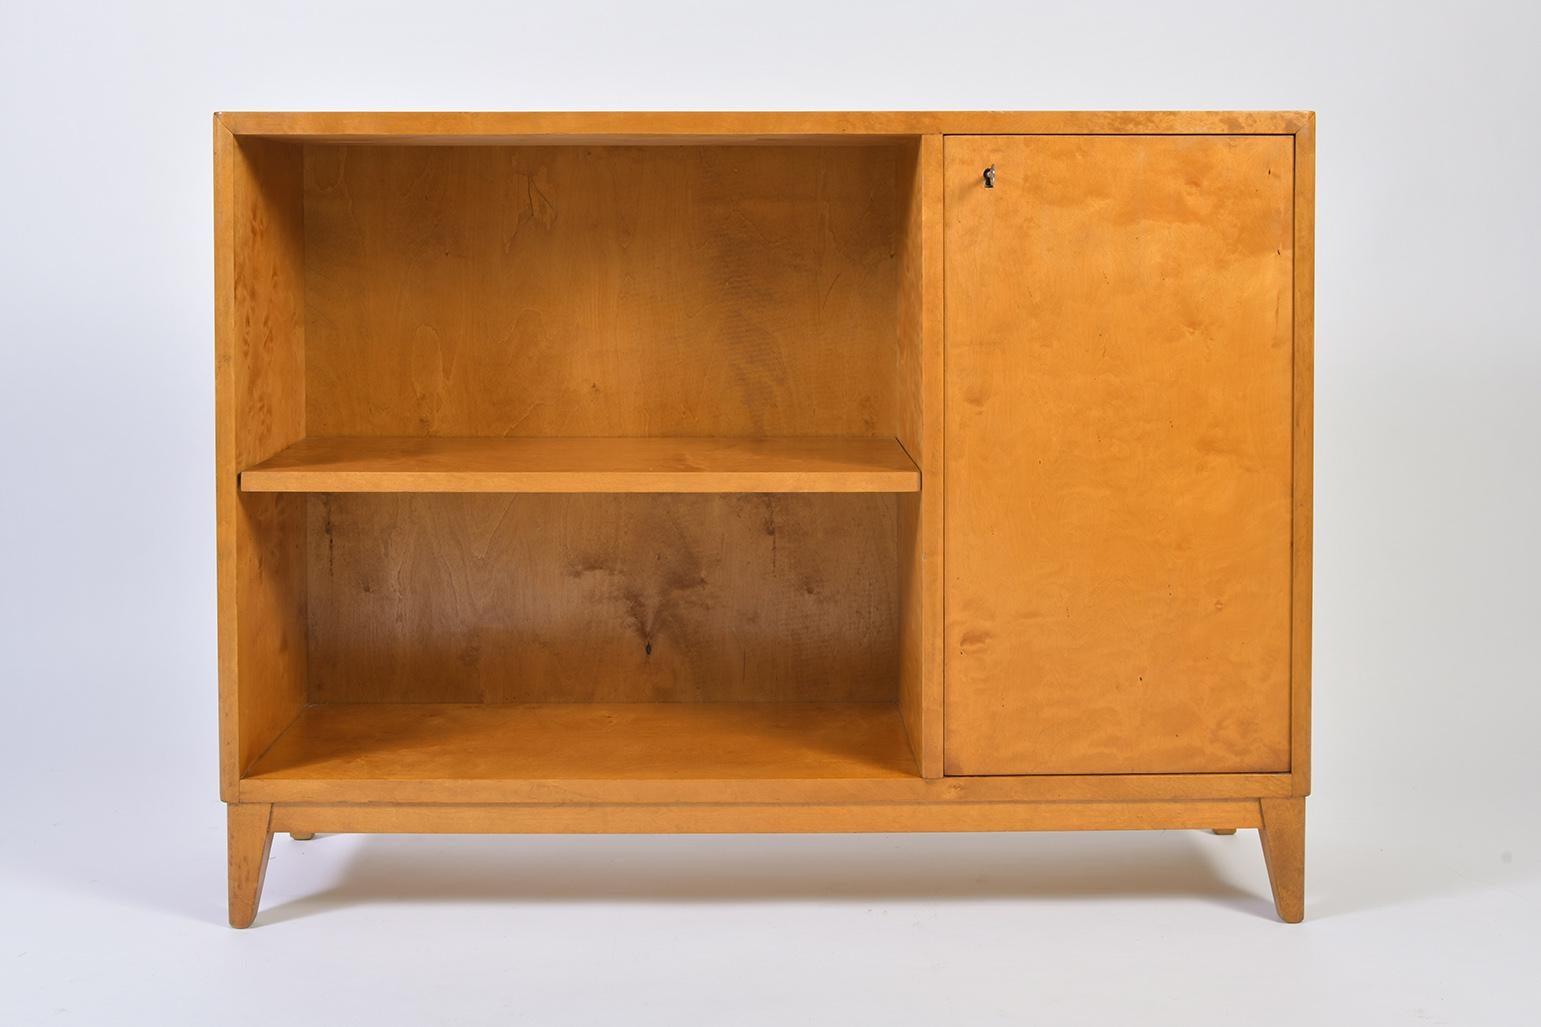 A birch cabinet, the left hand-side section with an adjustable shelf, the right-hand side cupboard revealing an adjustable shelf also, with its original key in working order.
Sweden, late 1940s.